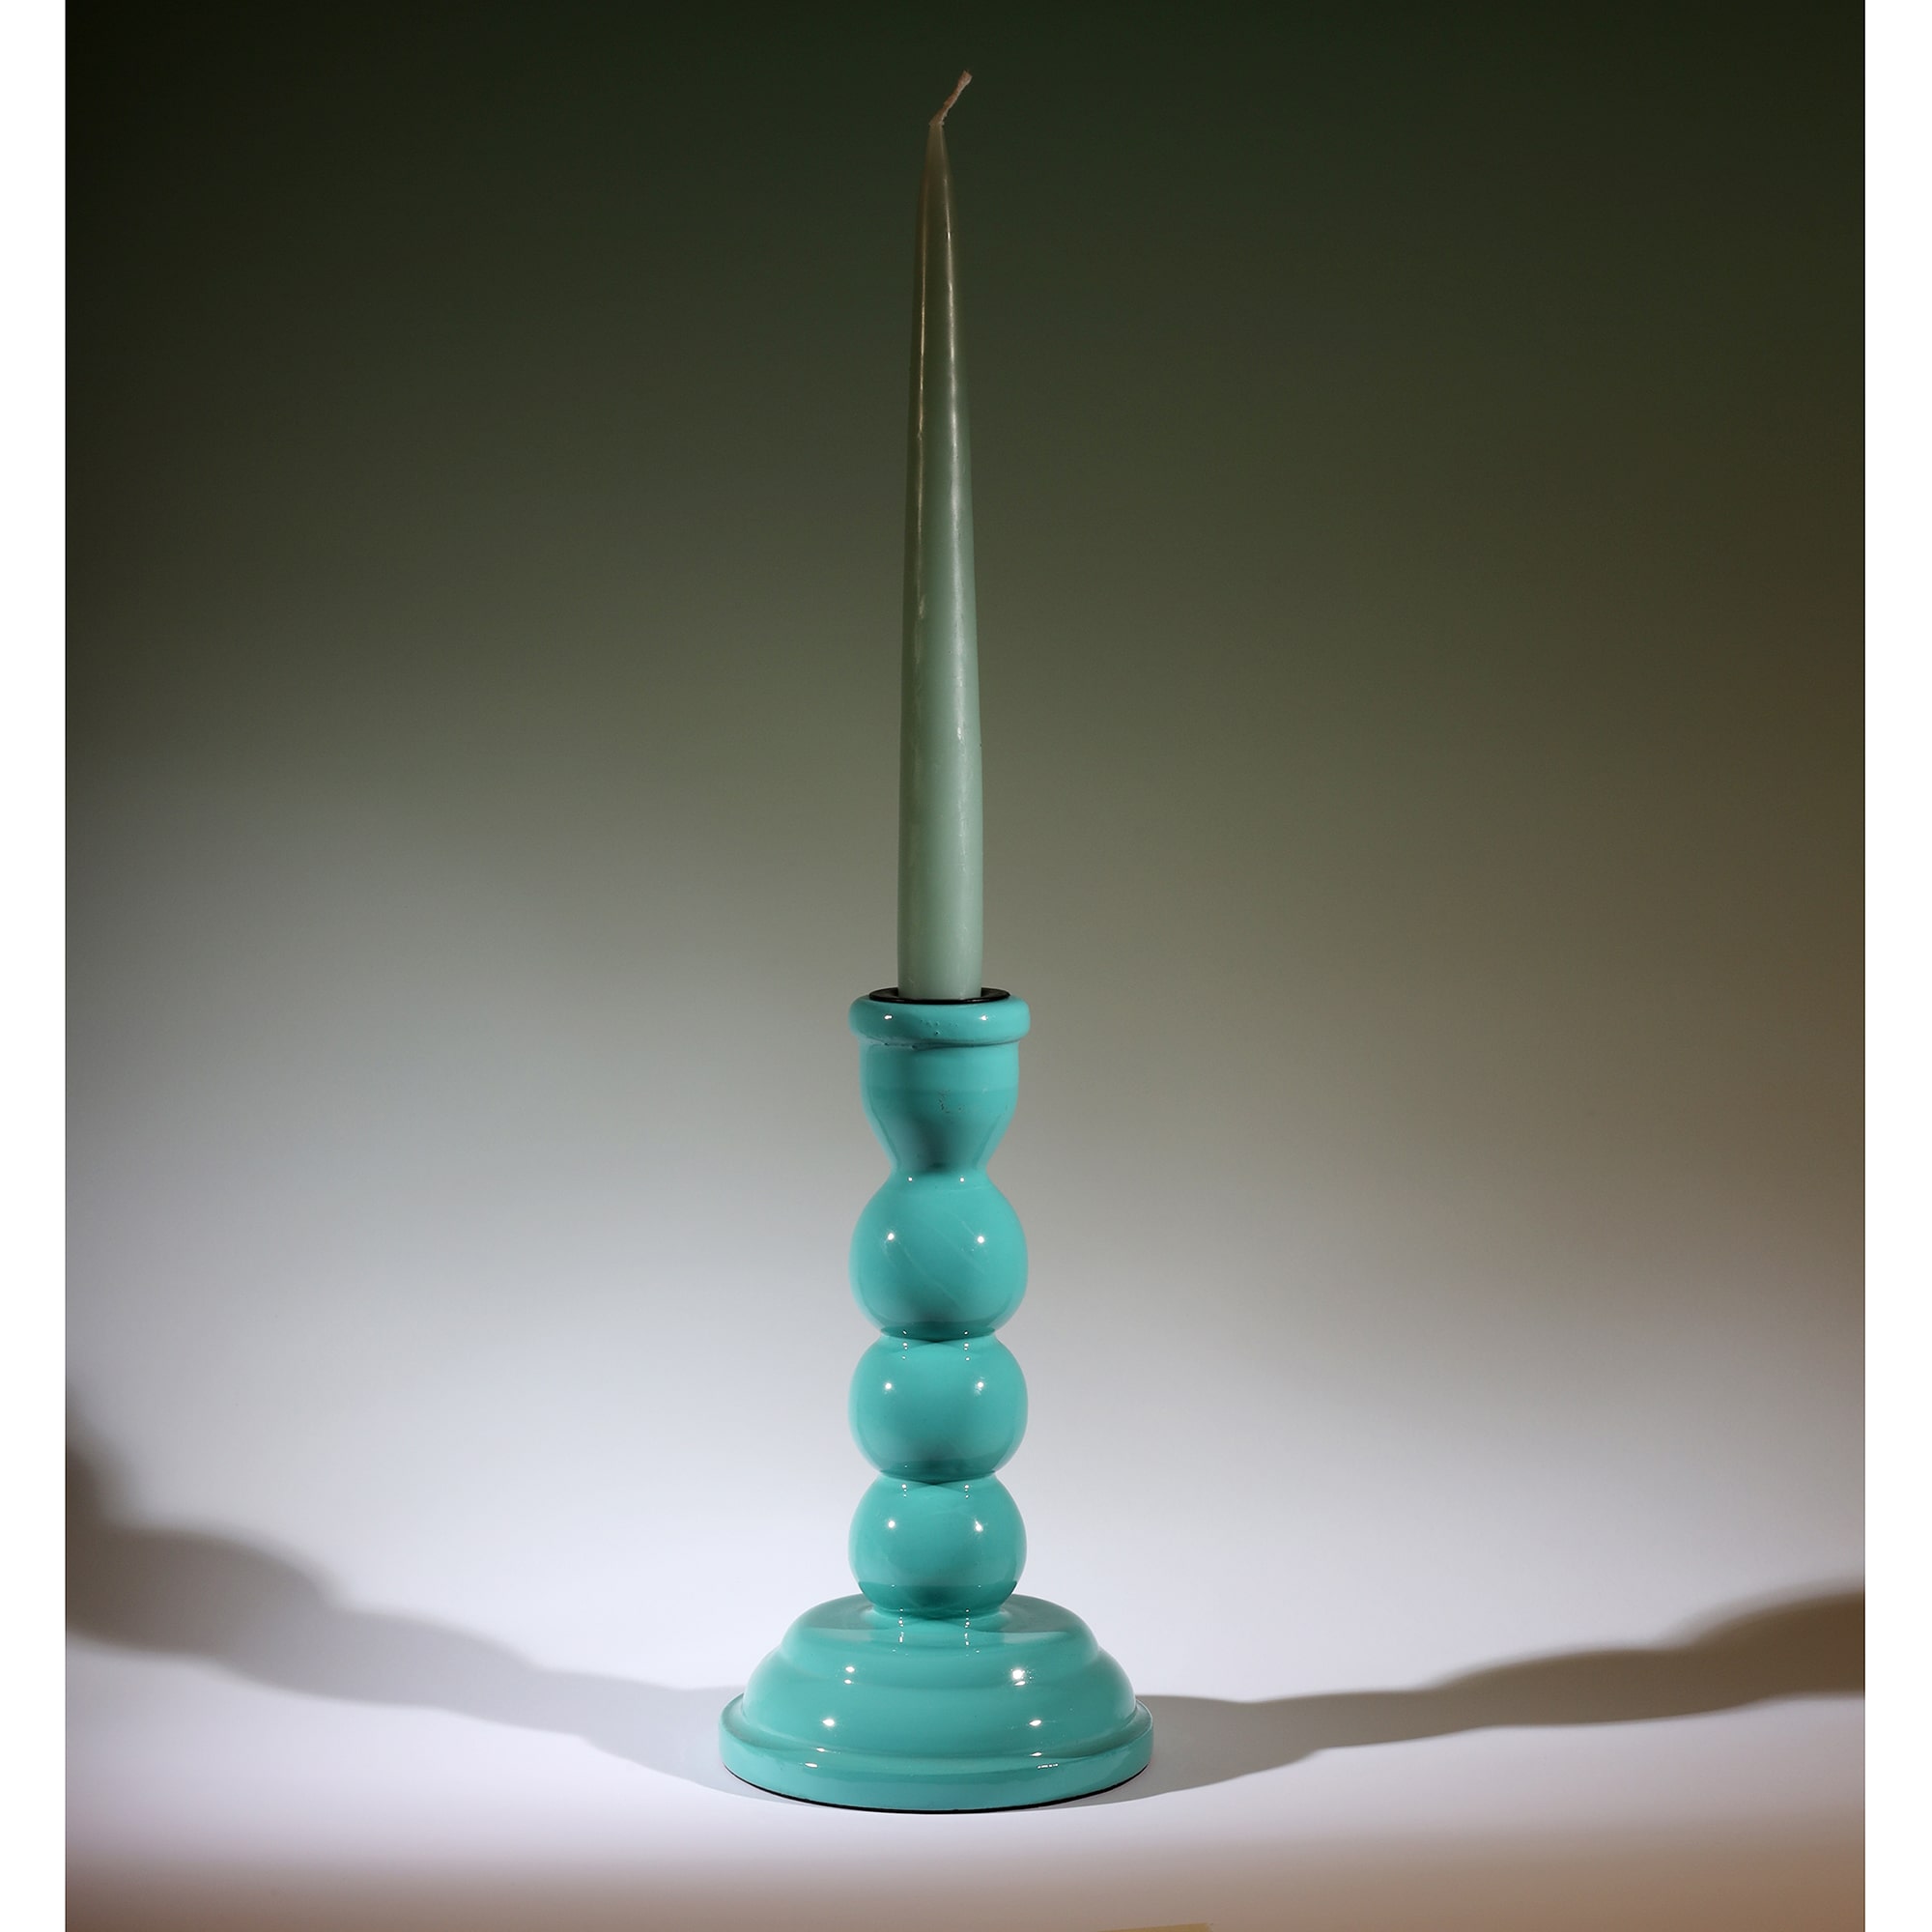 Turquoise Polished Lacquer Candle holder with a contrasting candle